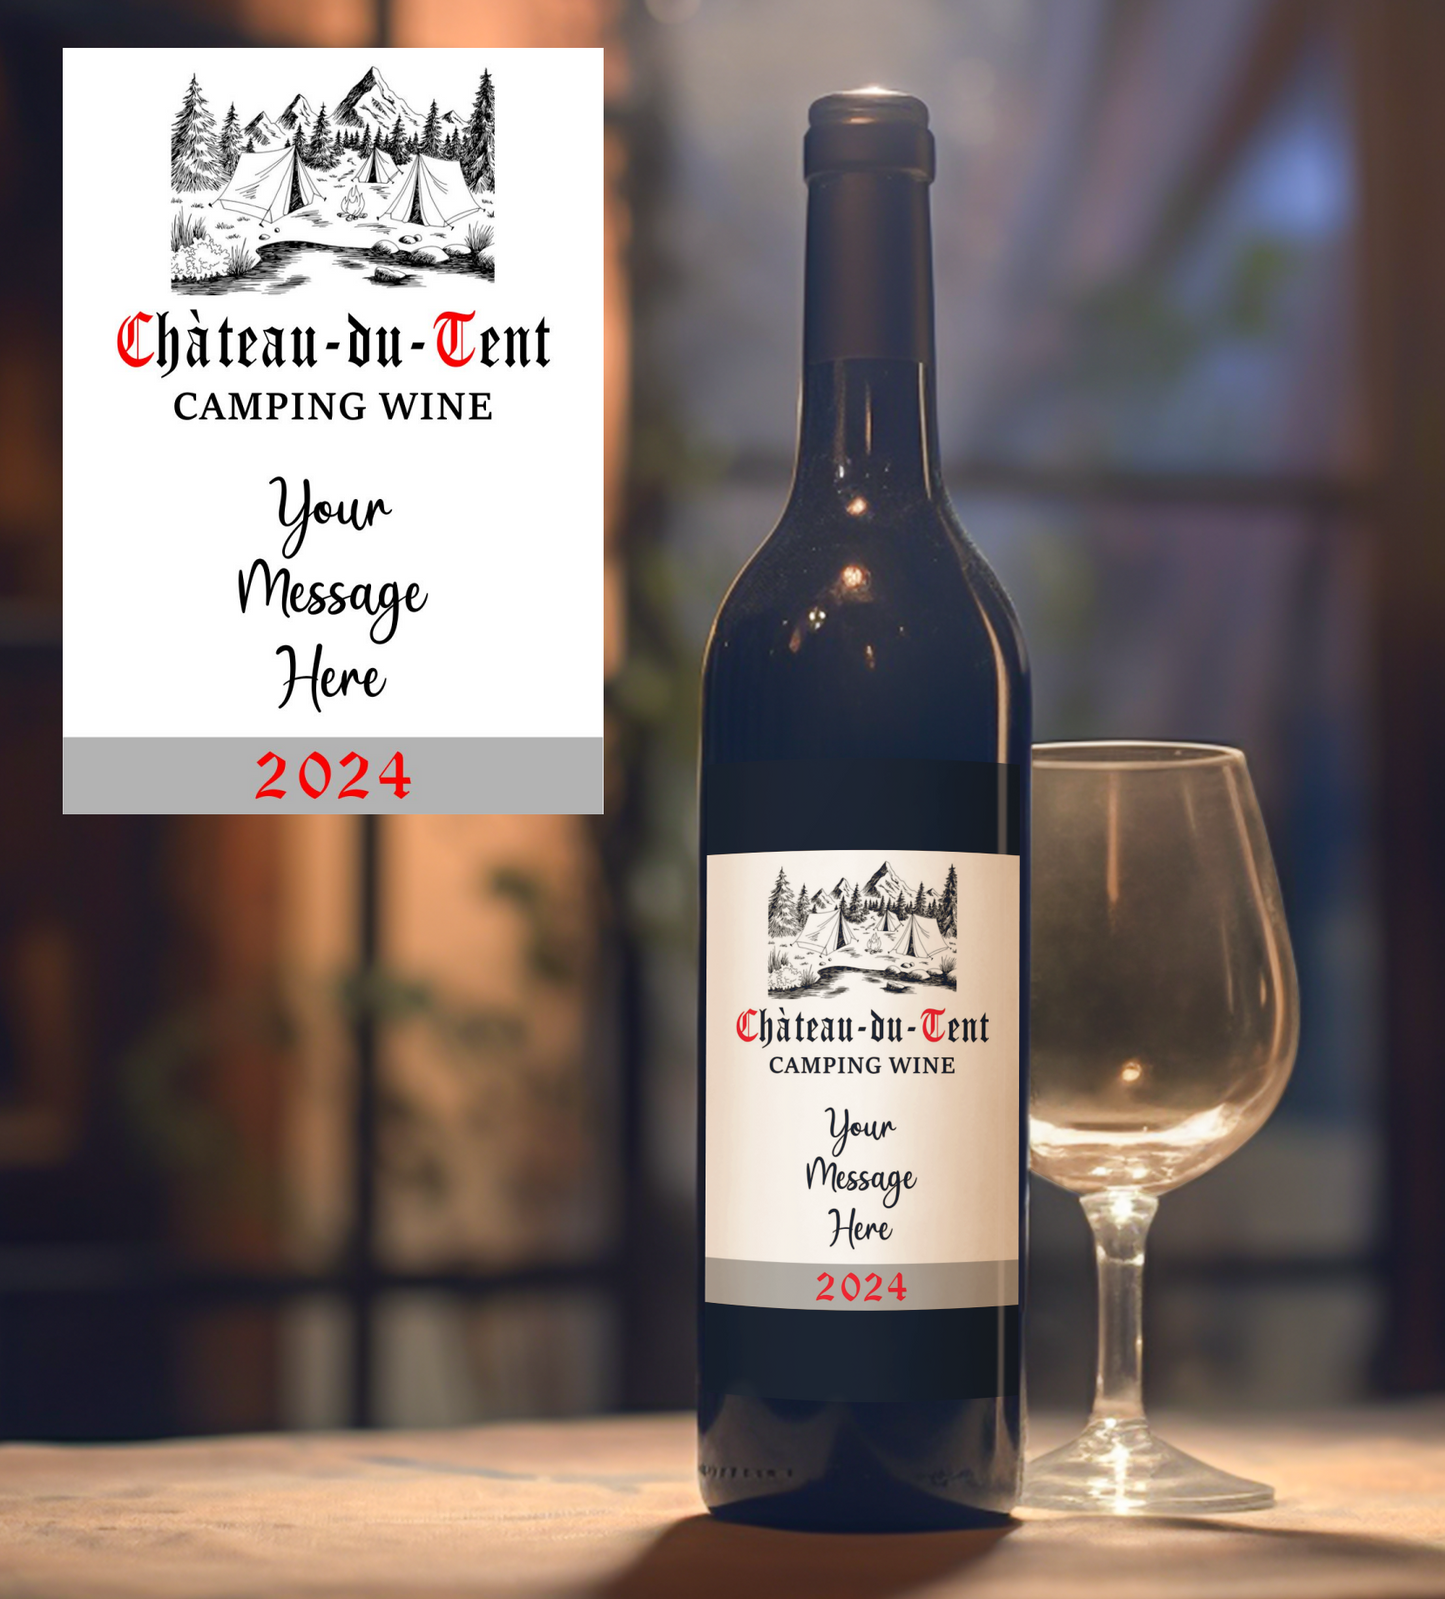 Camping Wine Bottle Label x2 - Chateau du Tent - Personalise Year & Message - To fit Most Alcohol Bottles Custom Gift